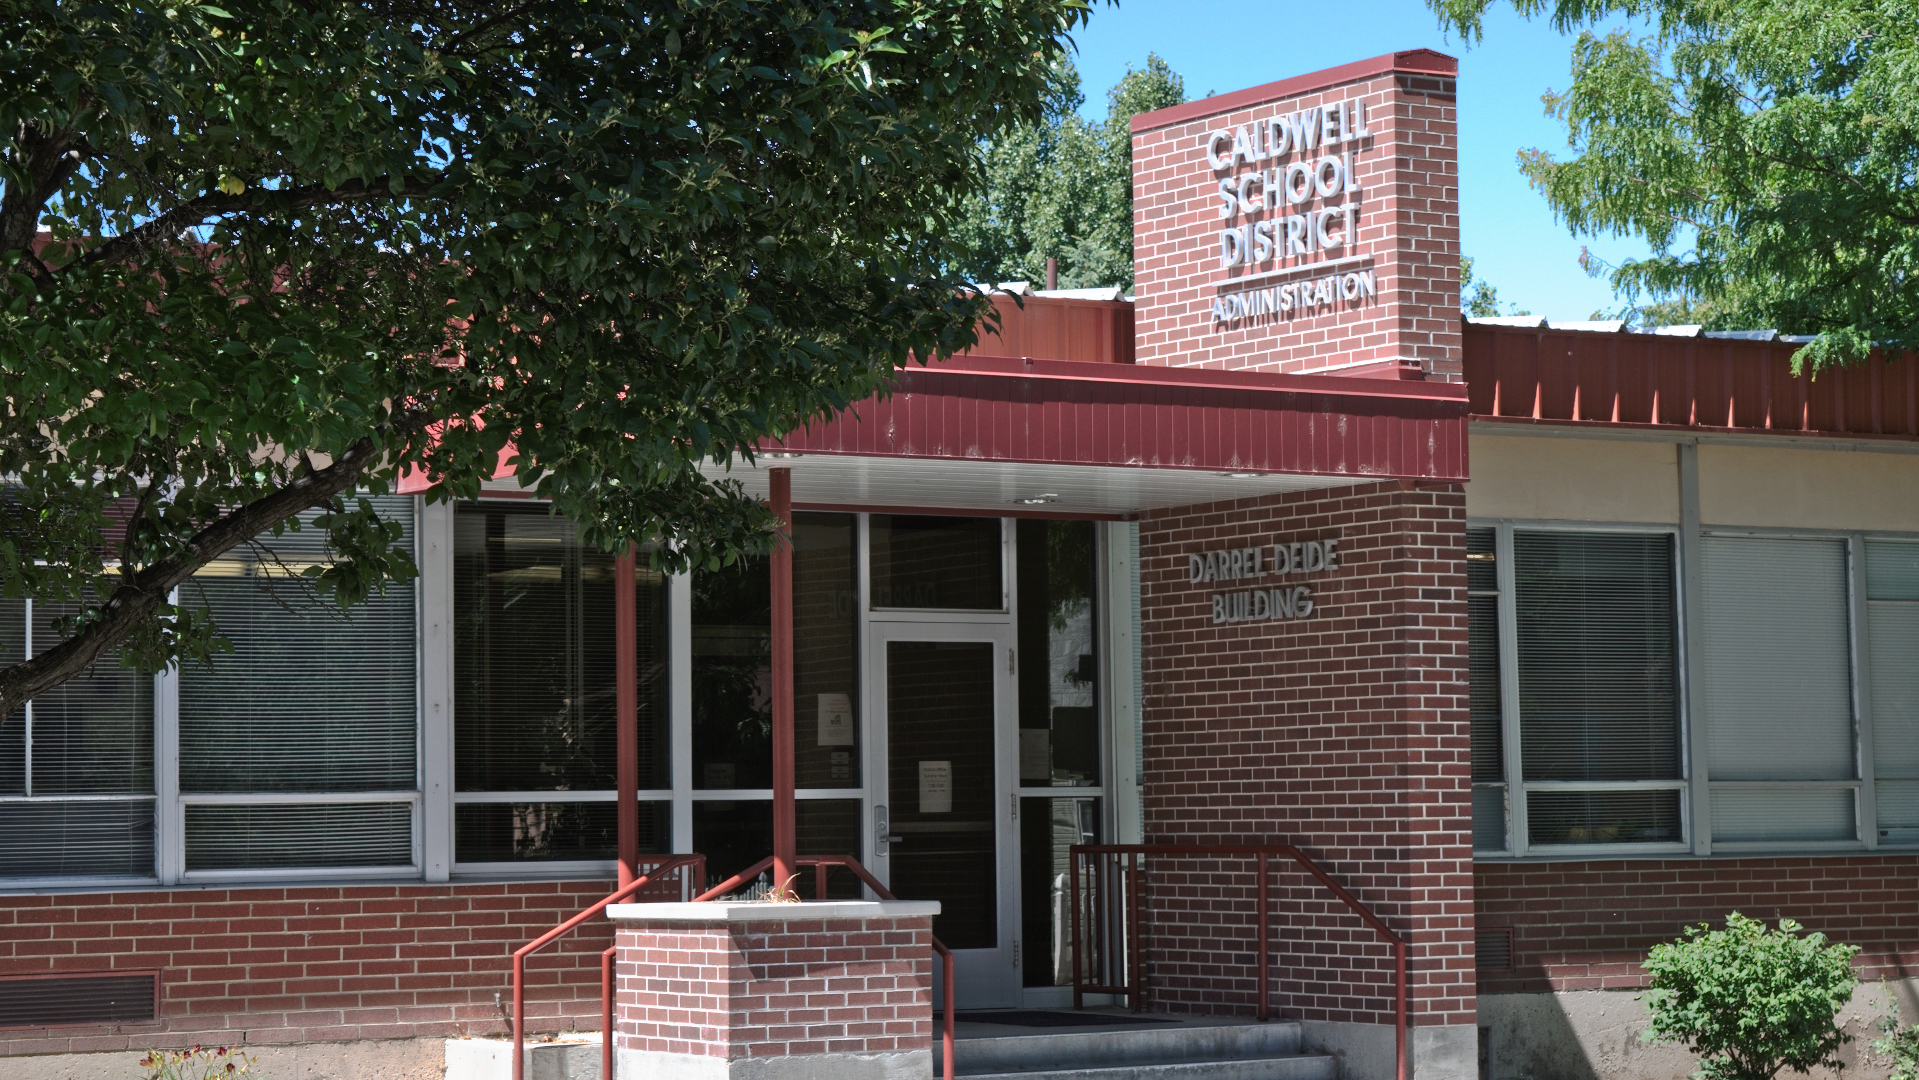 Caldwell School District Office